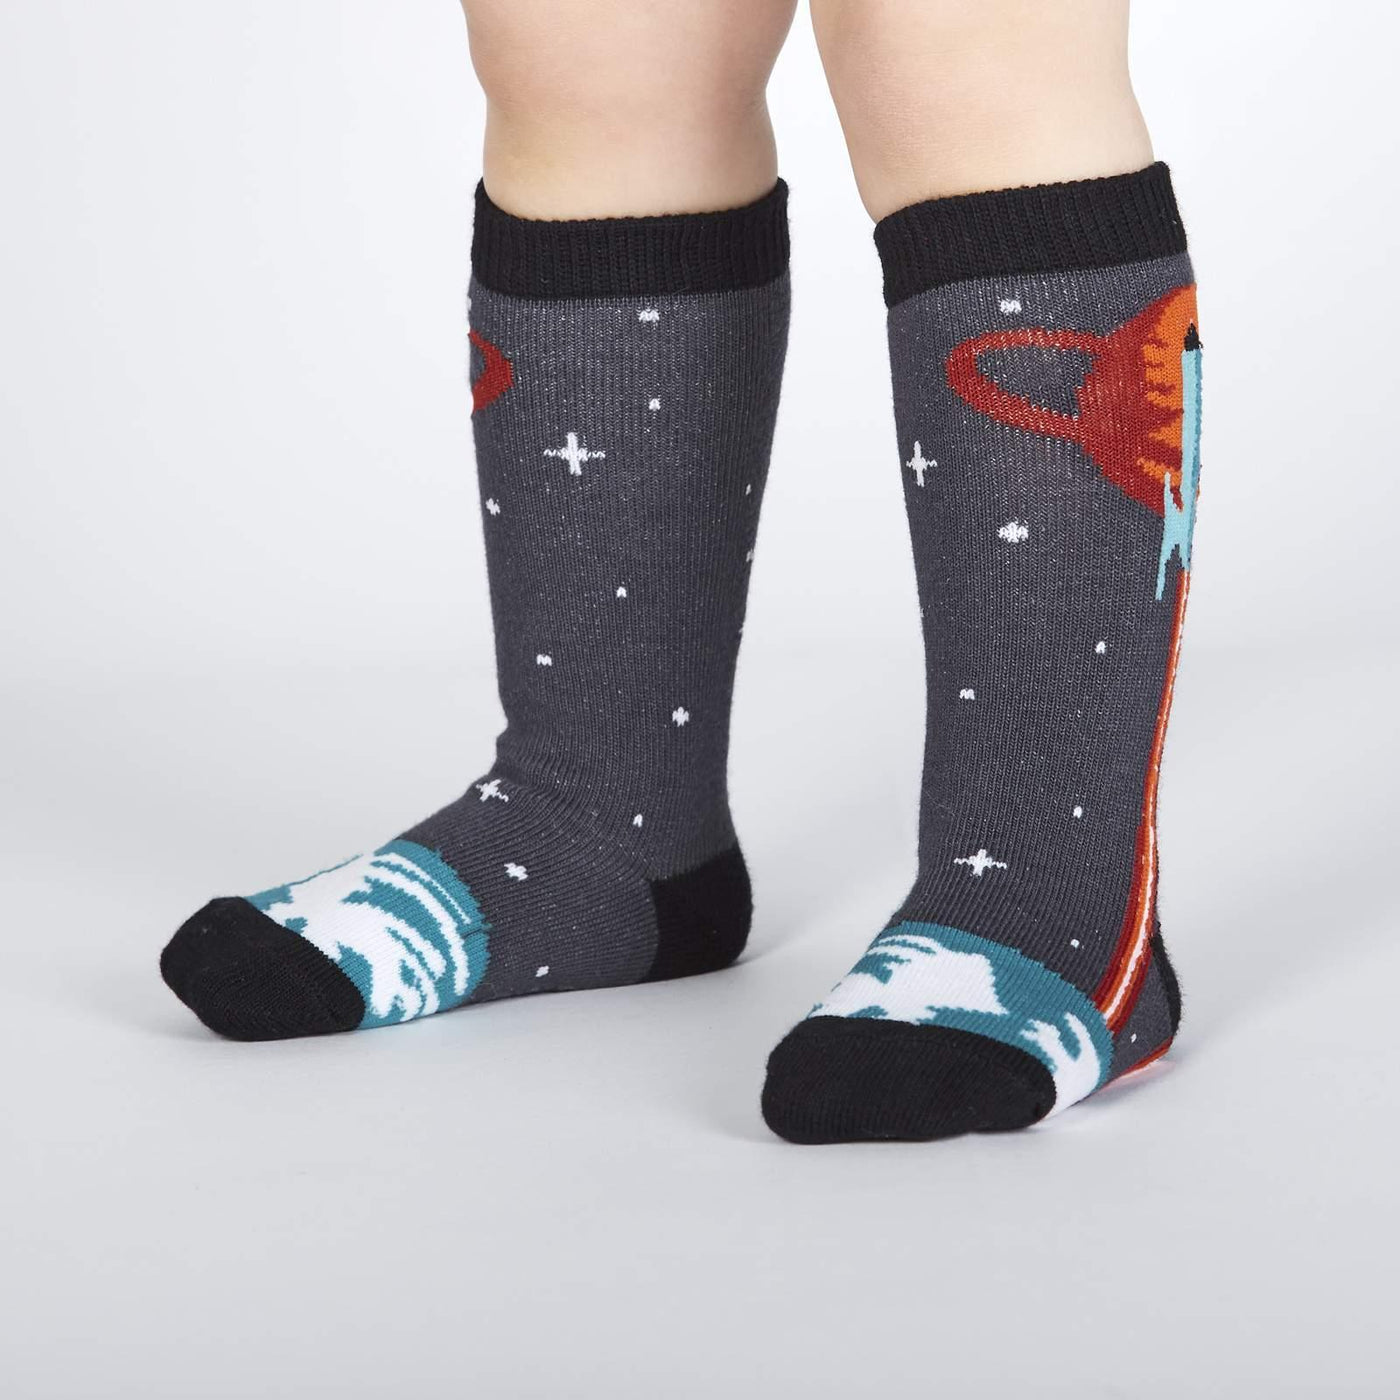 Launch from Earth, Toddler Knee-high - Sock It To Me - The Sock Monster